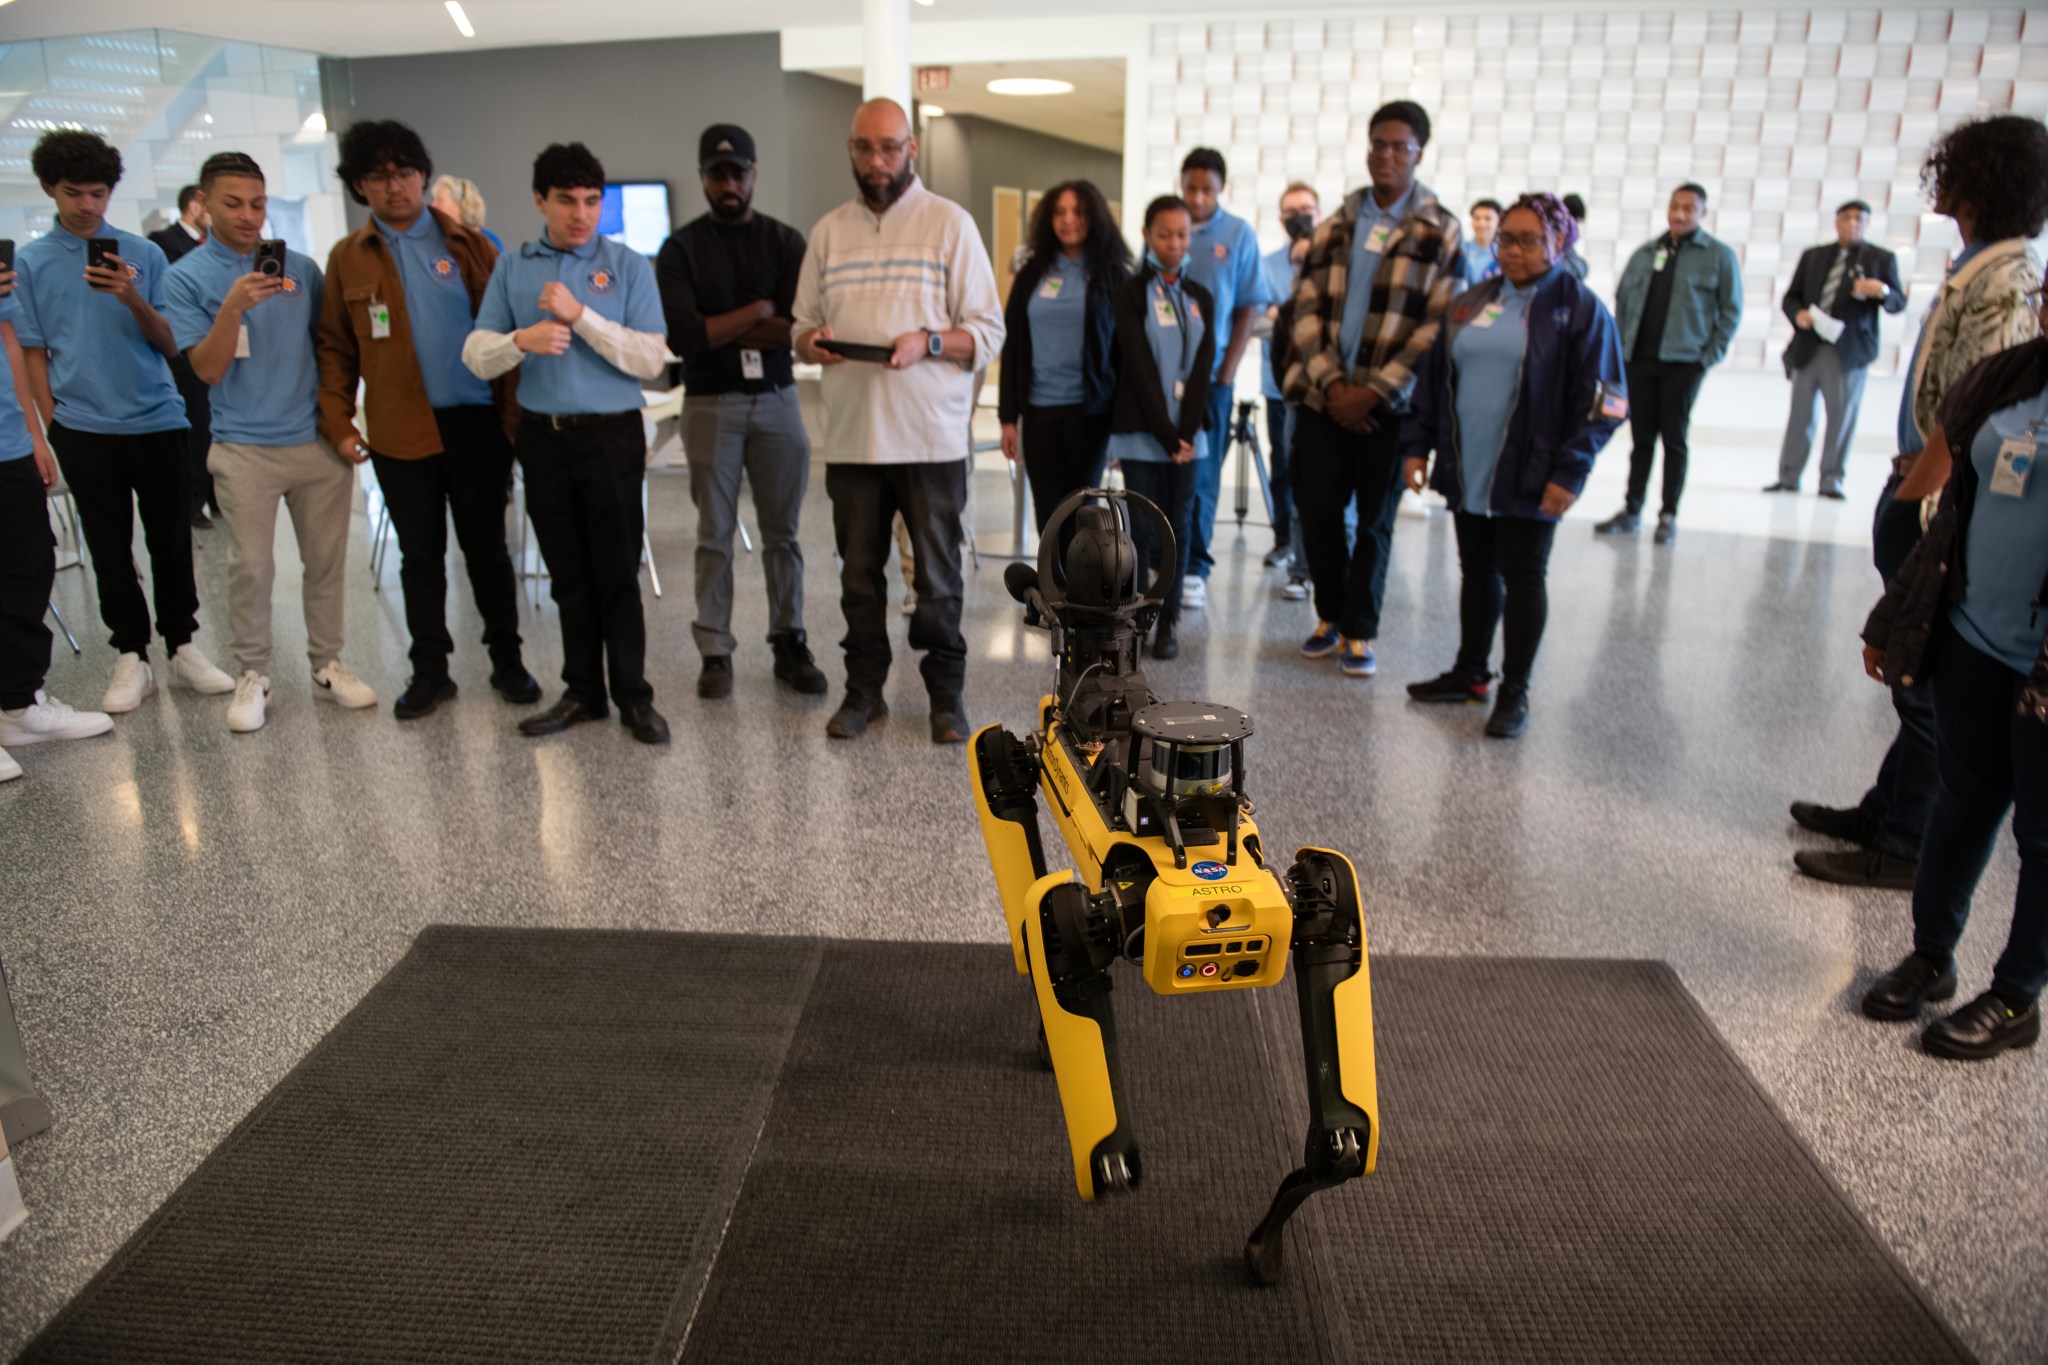 A group of high school students dressed in blue shirts and dark pants observe a demonstration with a yellow robotic dog in a large hallway . A man holds a remote control in his hands.